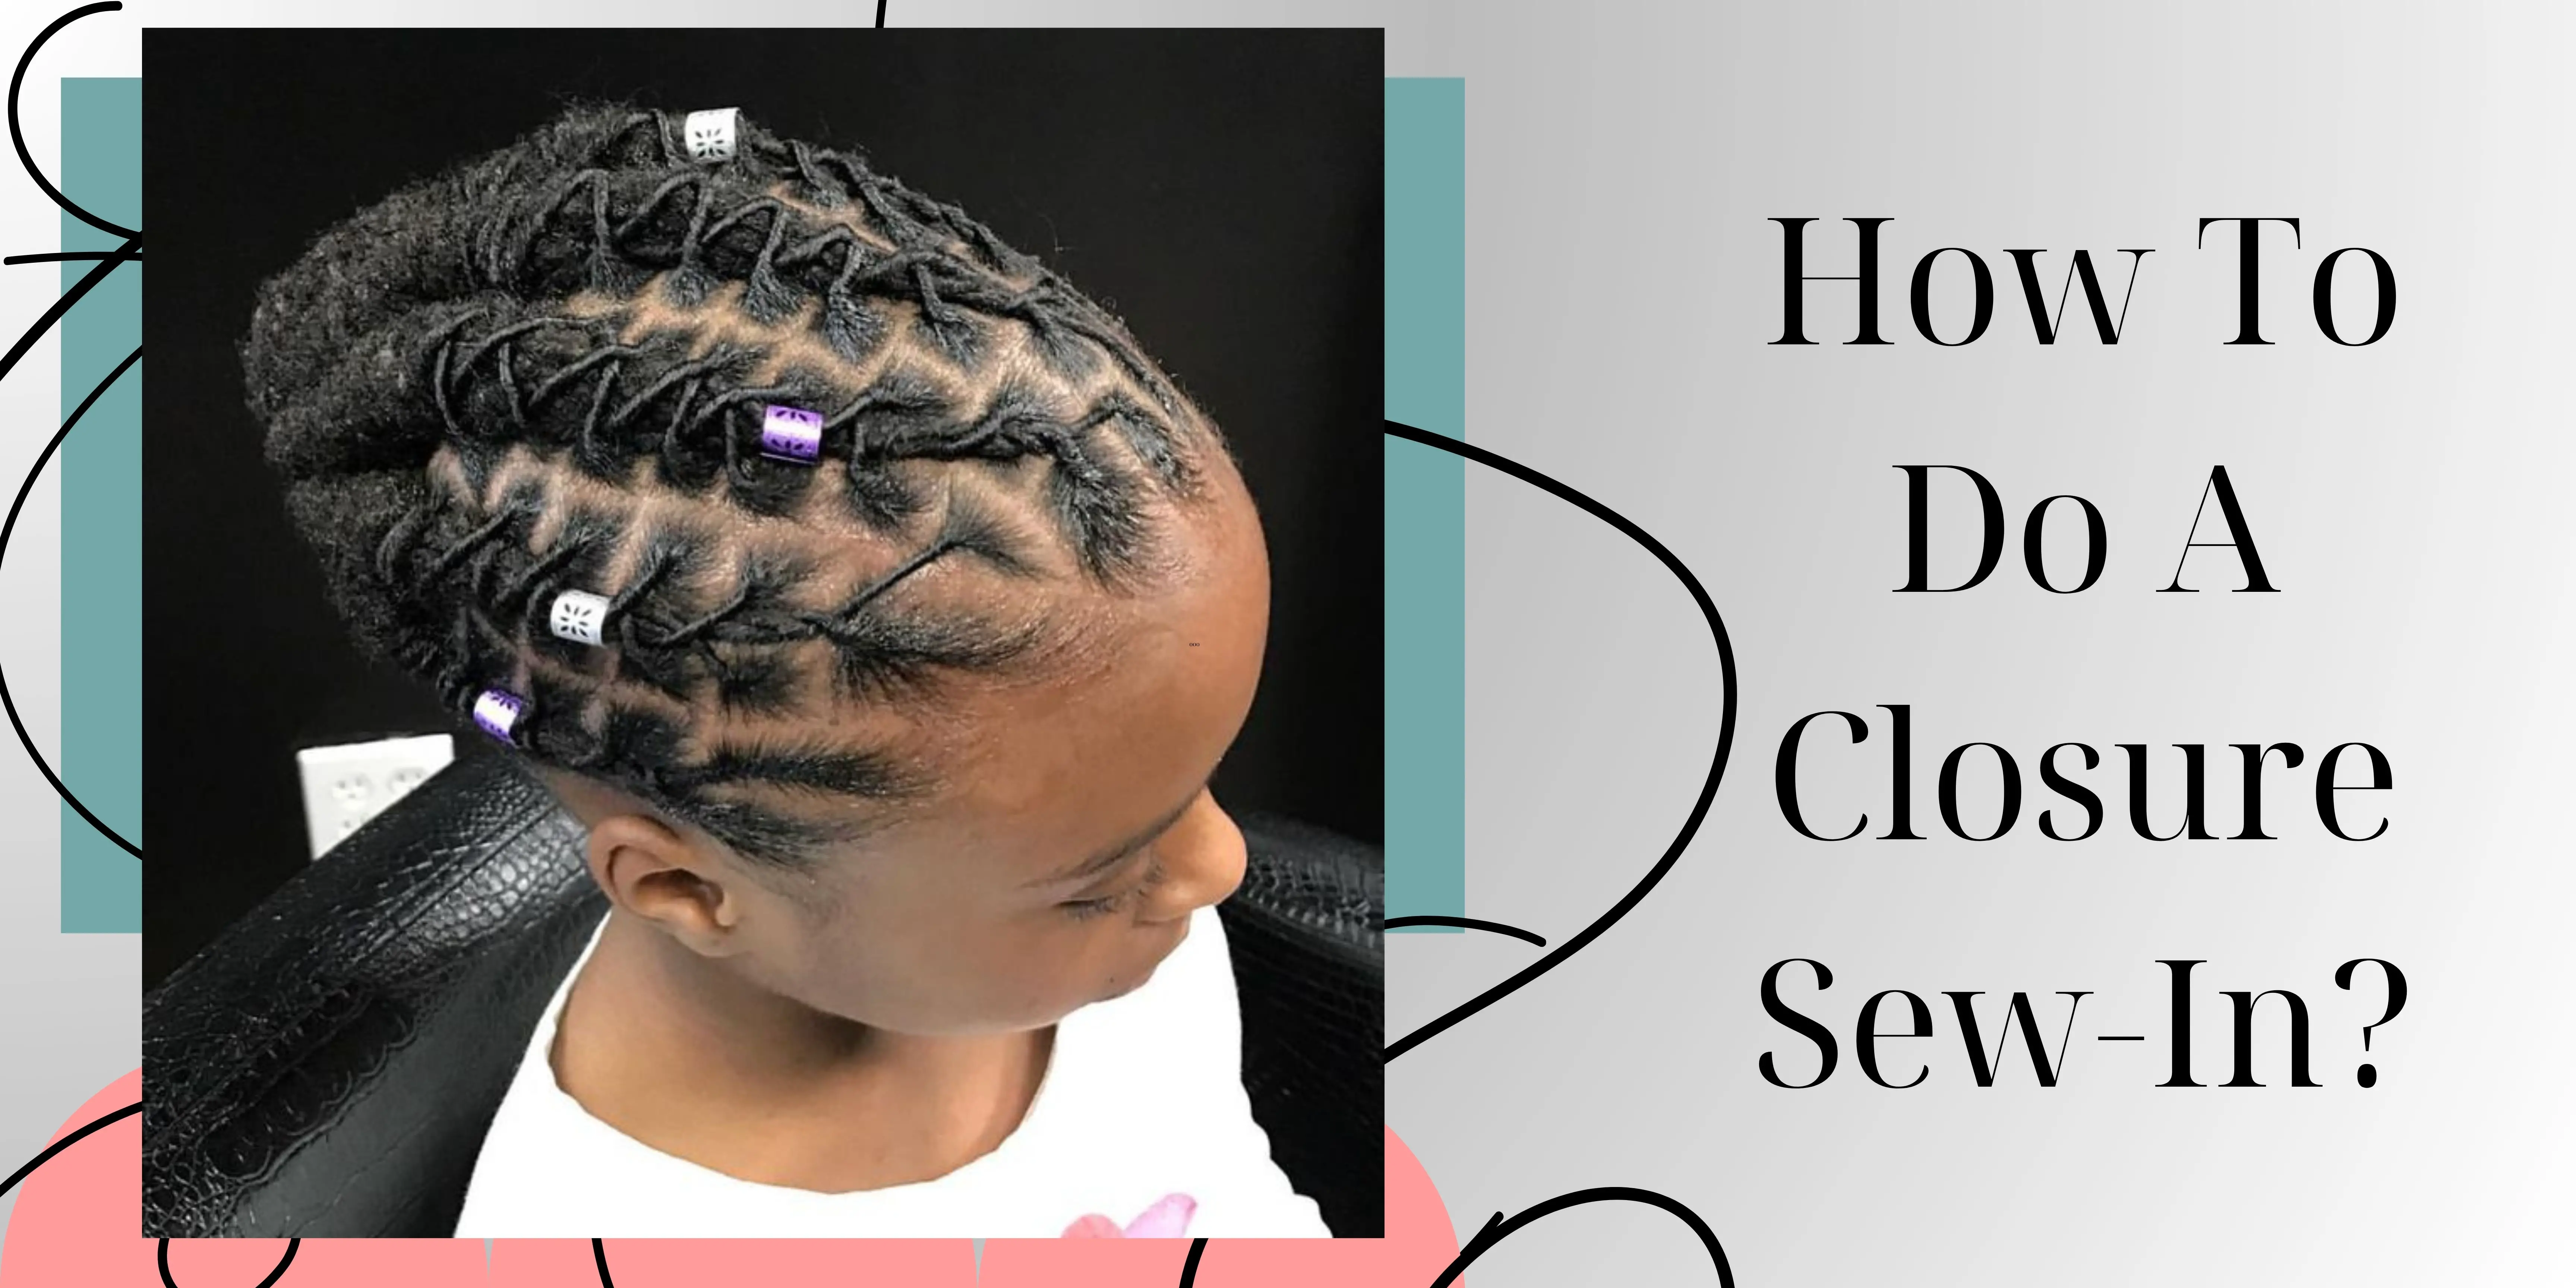 How To Do A Closure Sew-In?